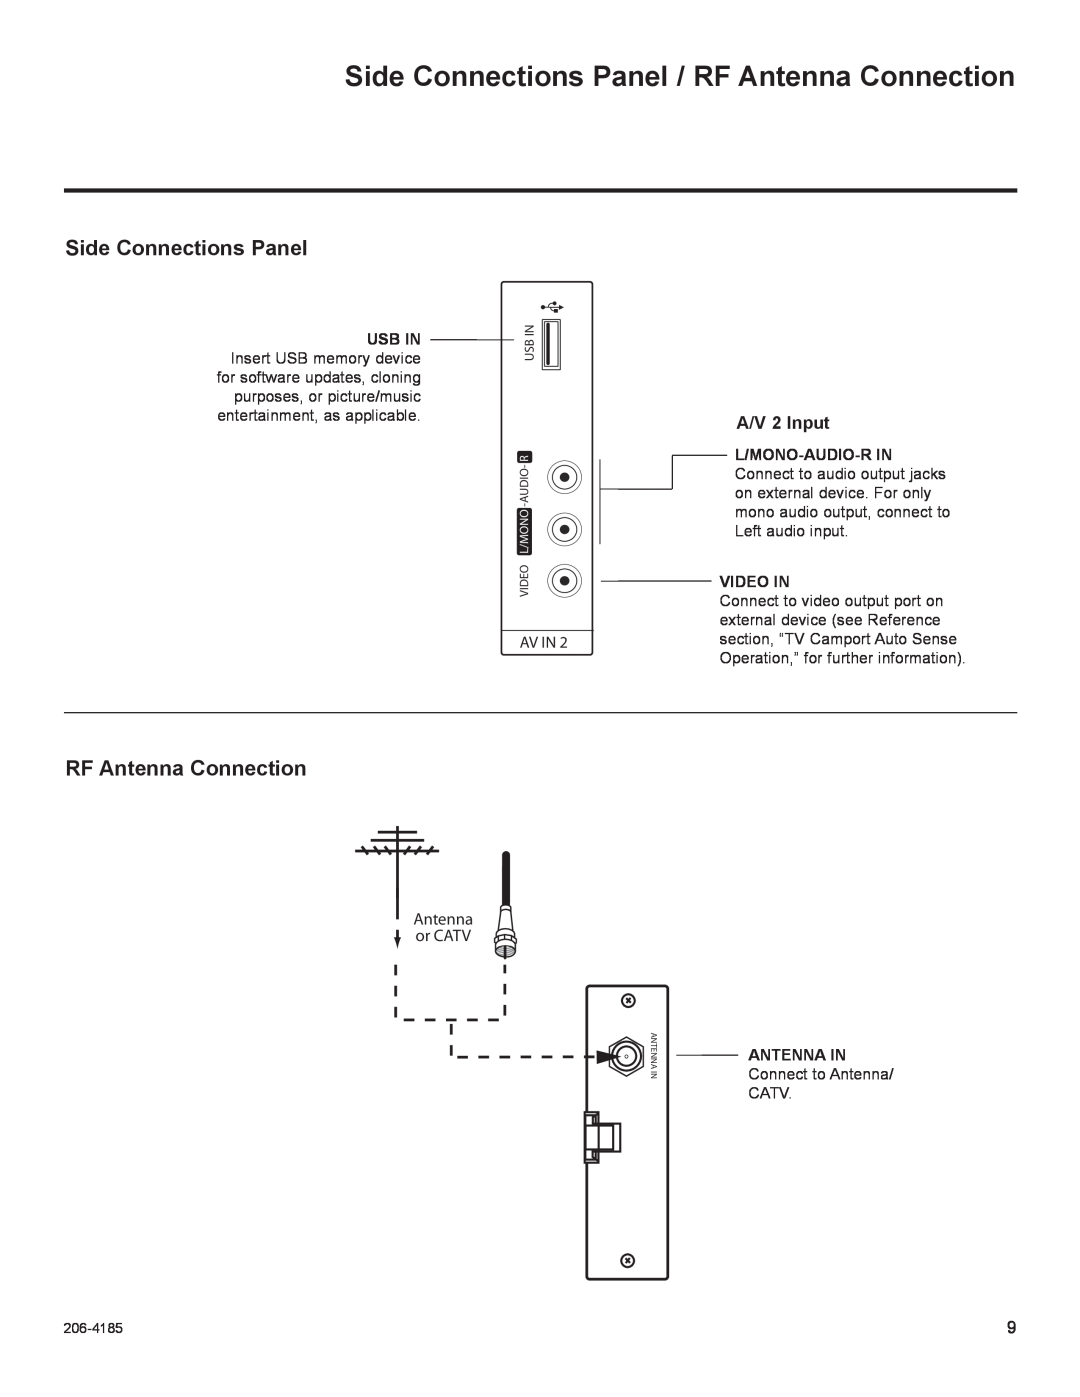 LG Electronics 37LD330H, 32LD330H setup guide Side Connections Panel / RF Antenna Connection, A/V 2 Input 